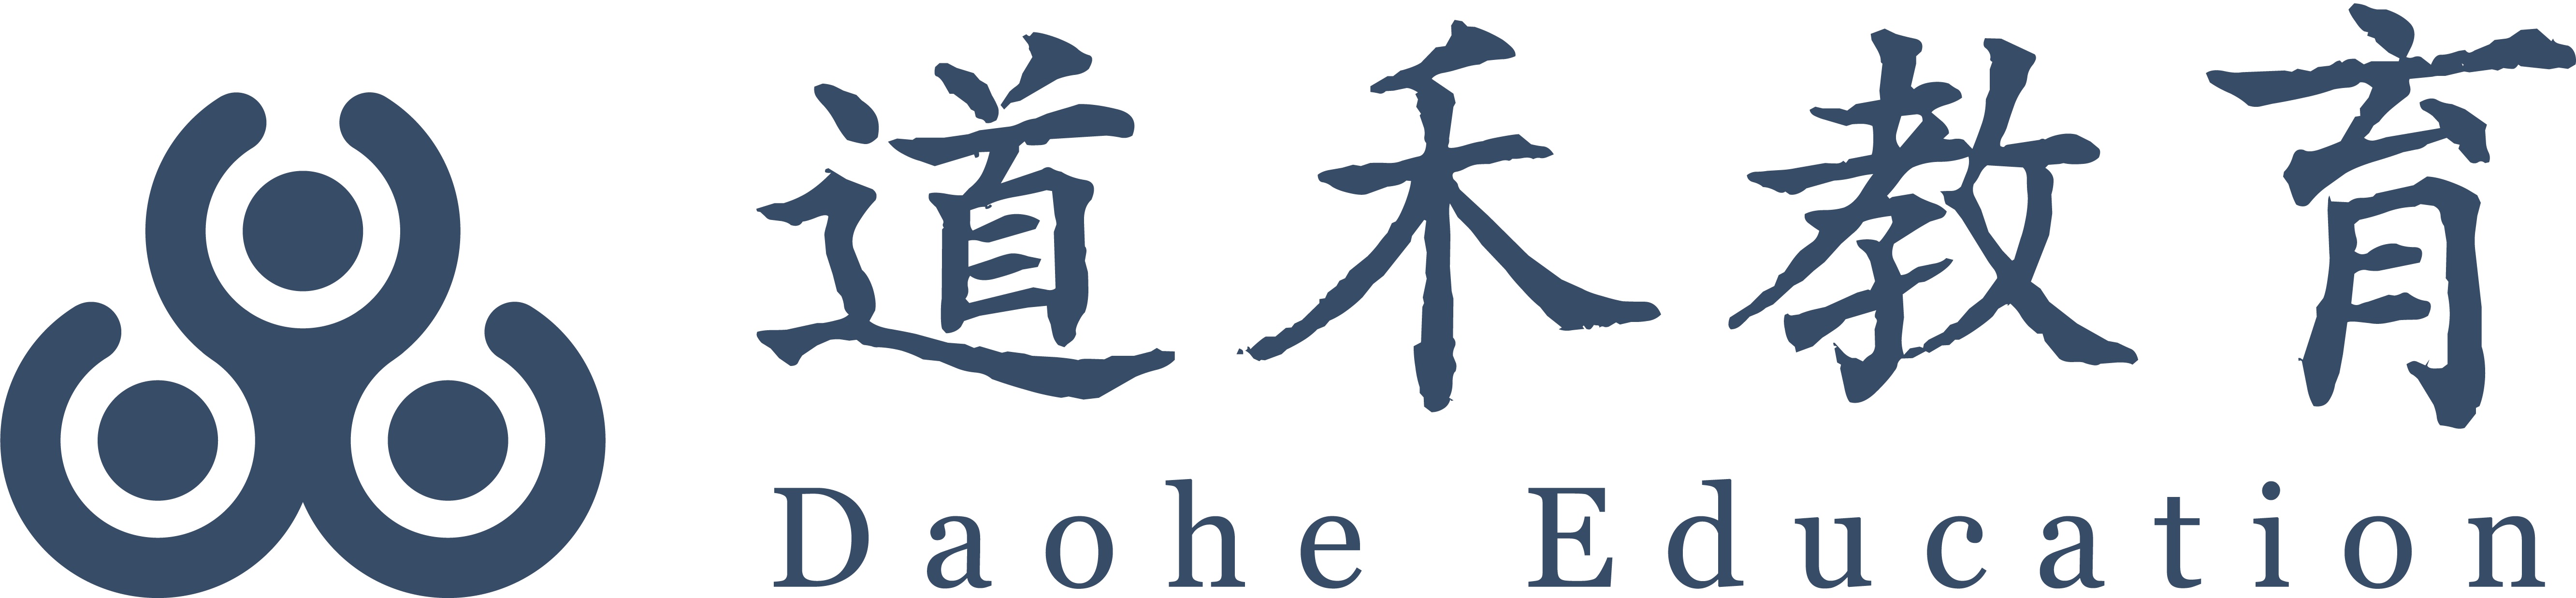 Daohe Education - banner